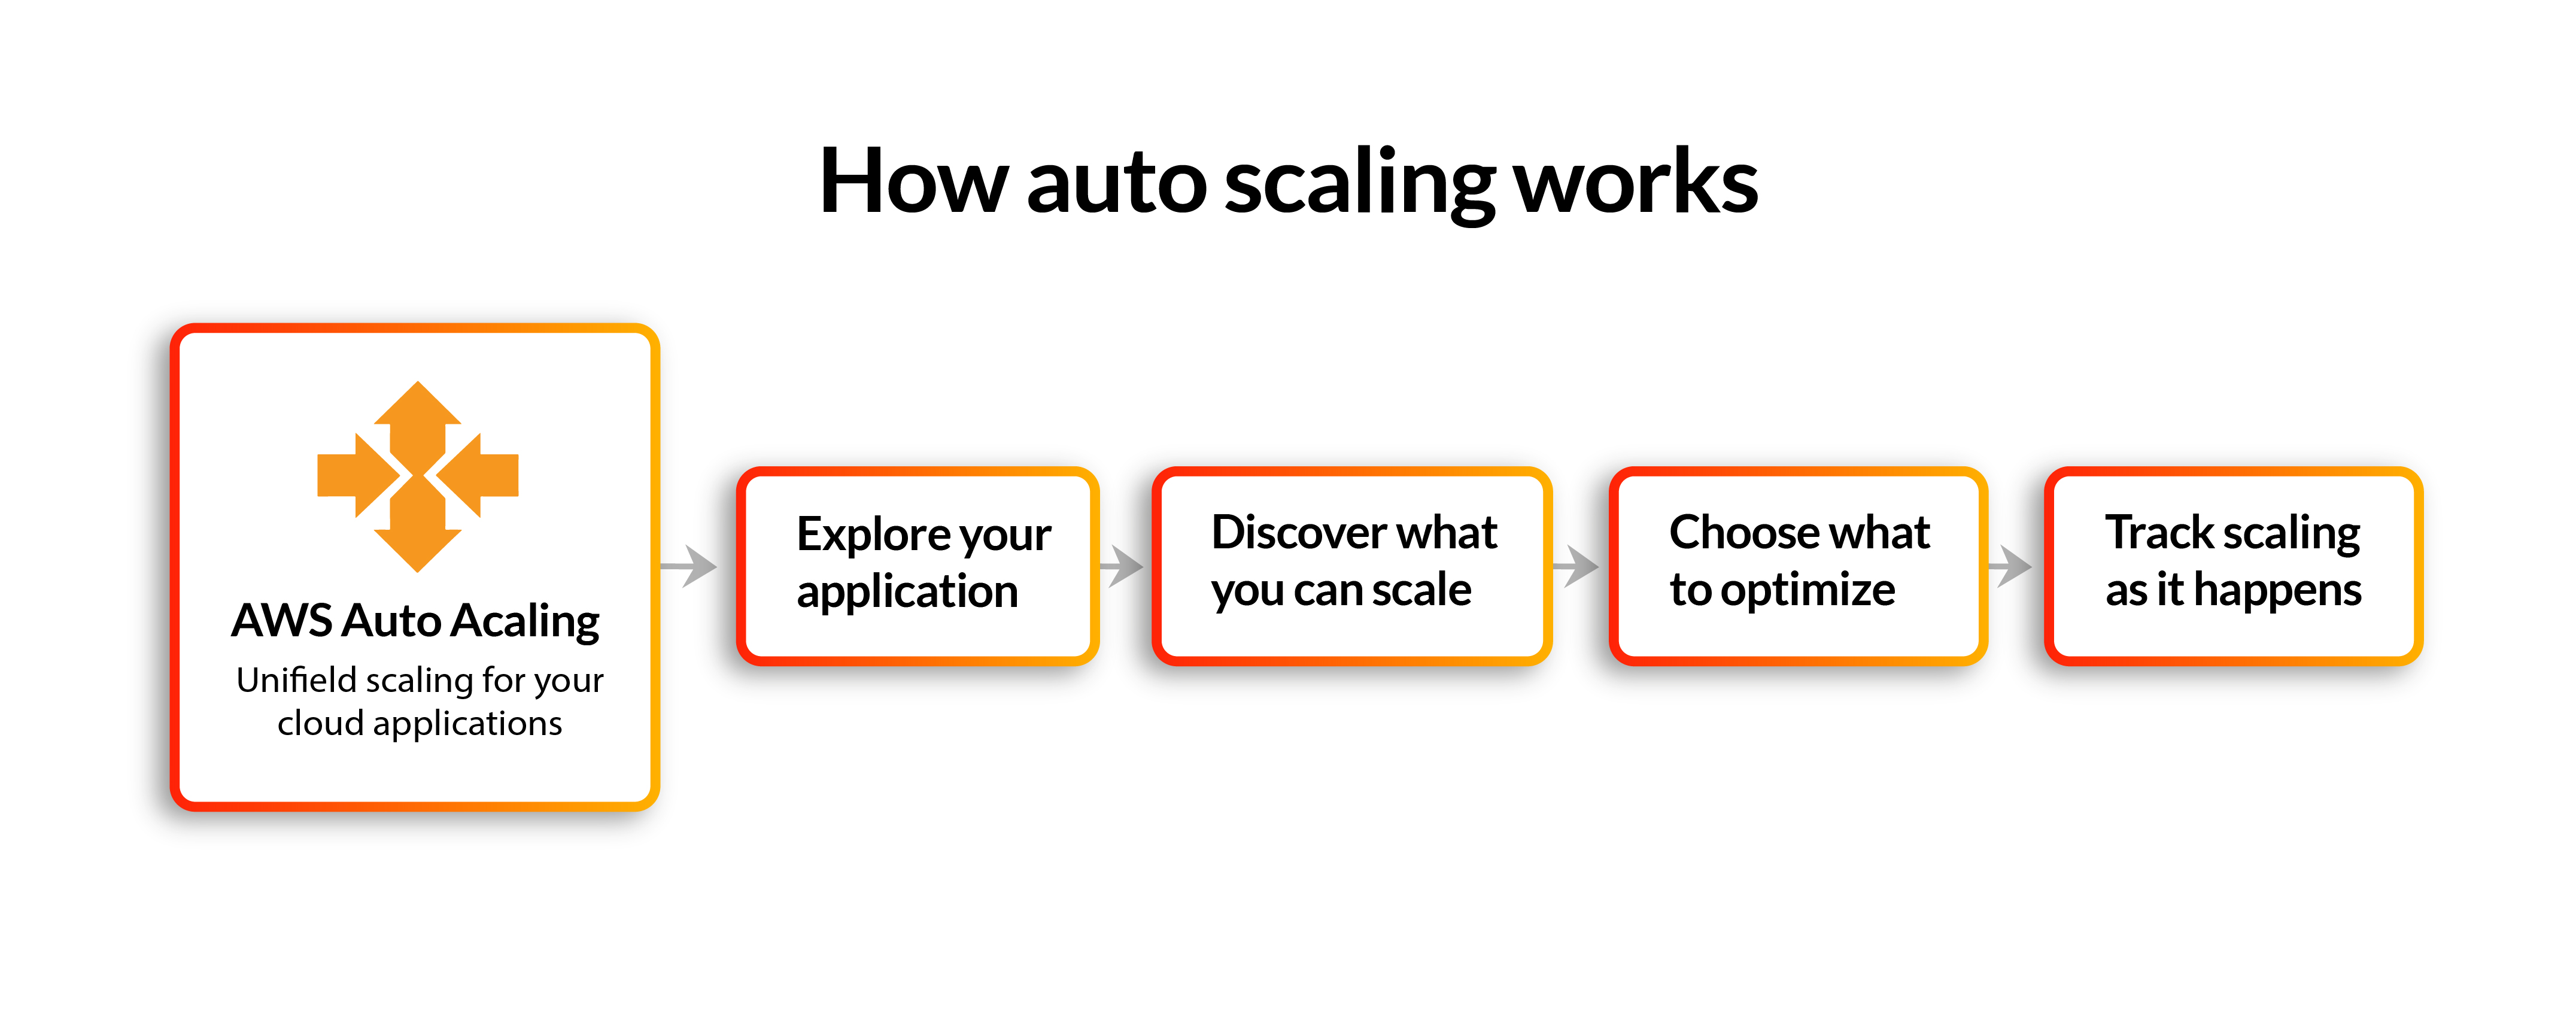 How Auto Scaling works